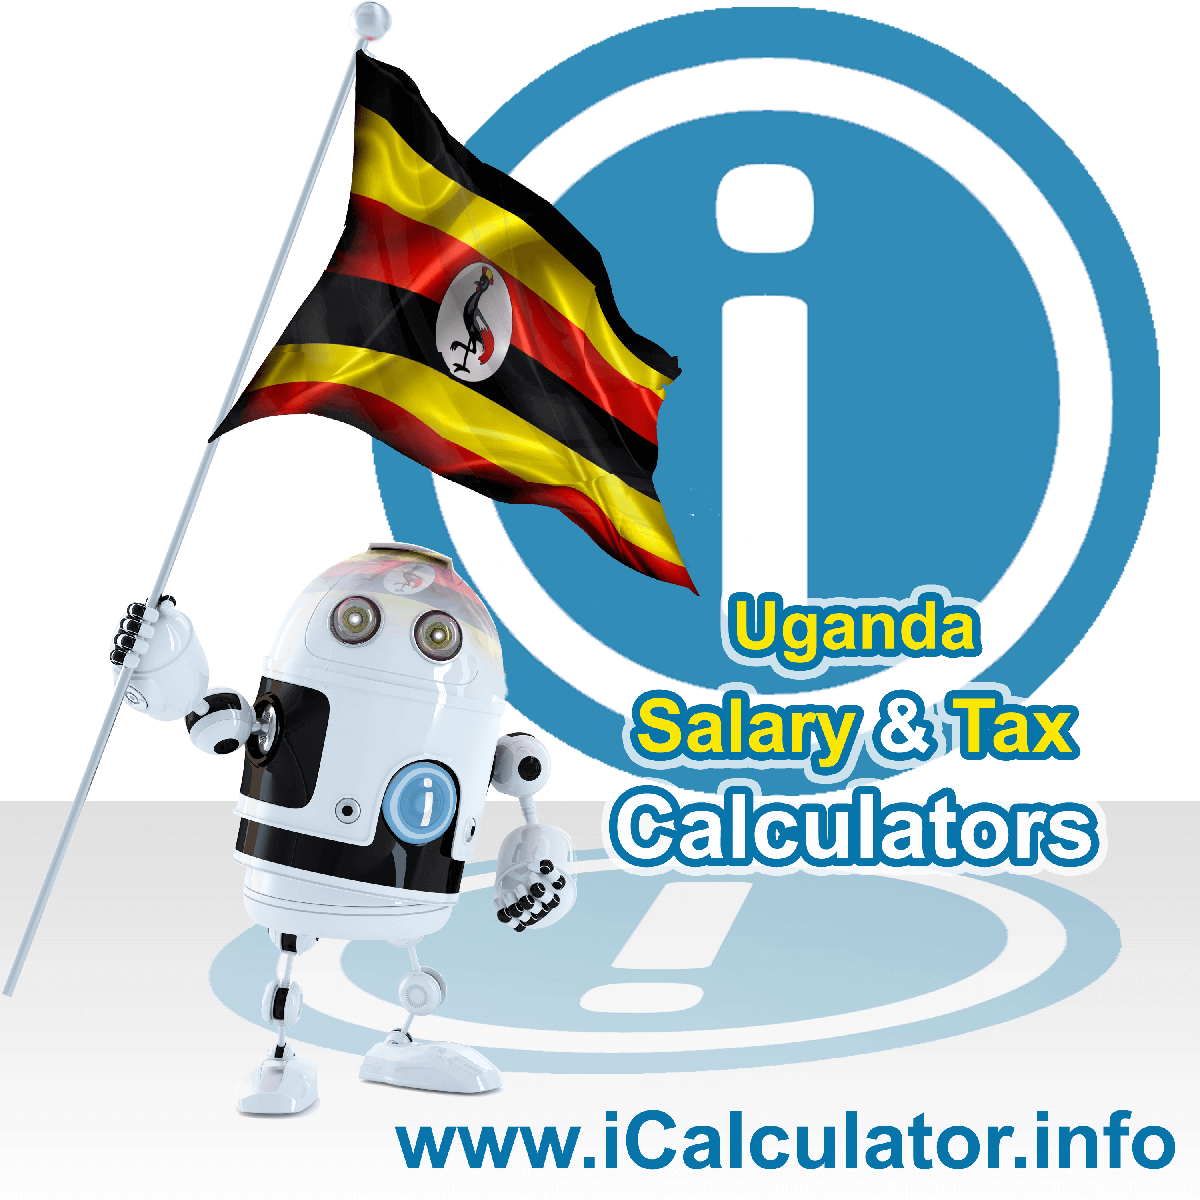 Uganda Salary Calculator. This image shows the Ugandaese flag and information relating to the tax formula for the Uganda Tax Calculator